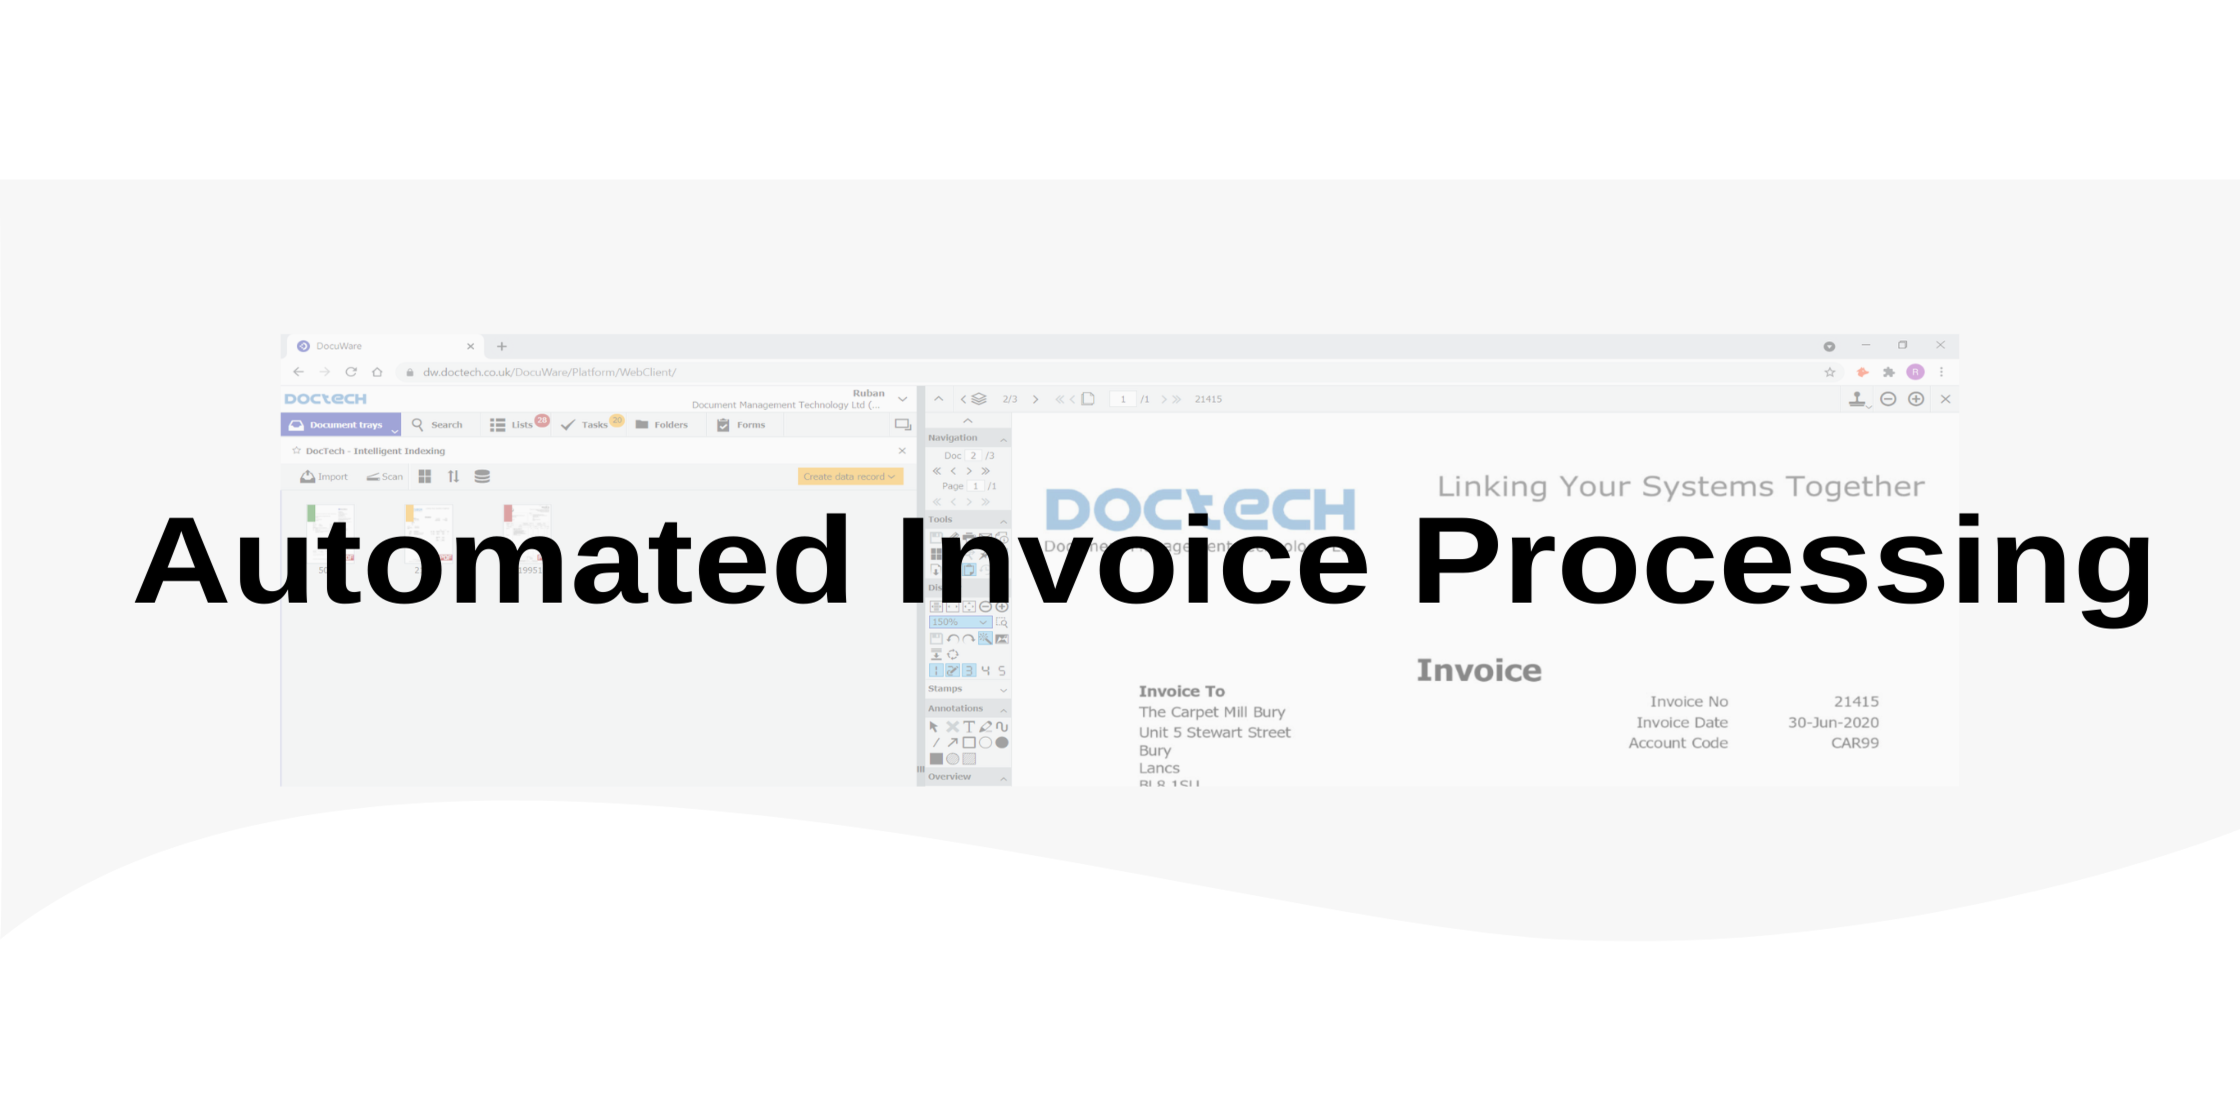 What is Automated Invoice Processing and Why Do I Need It?